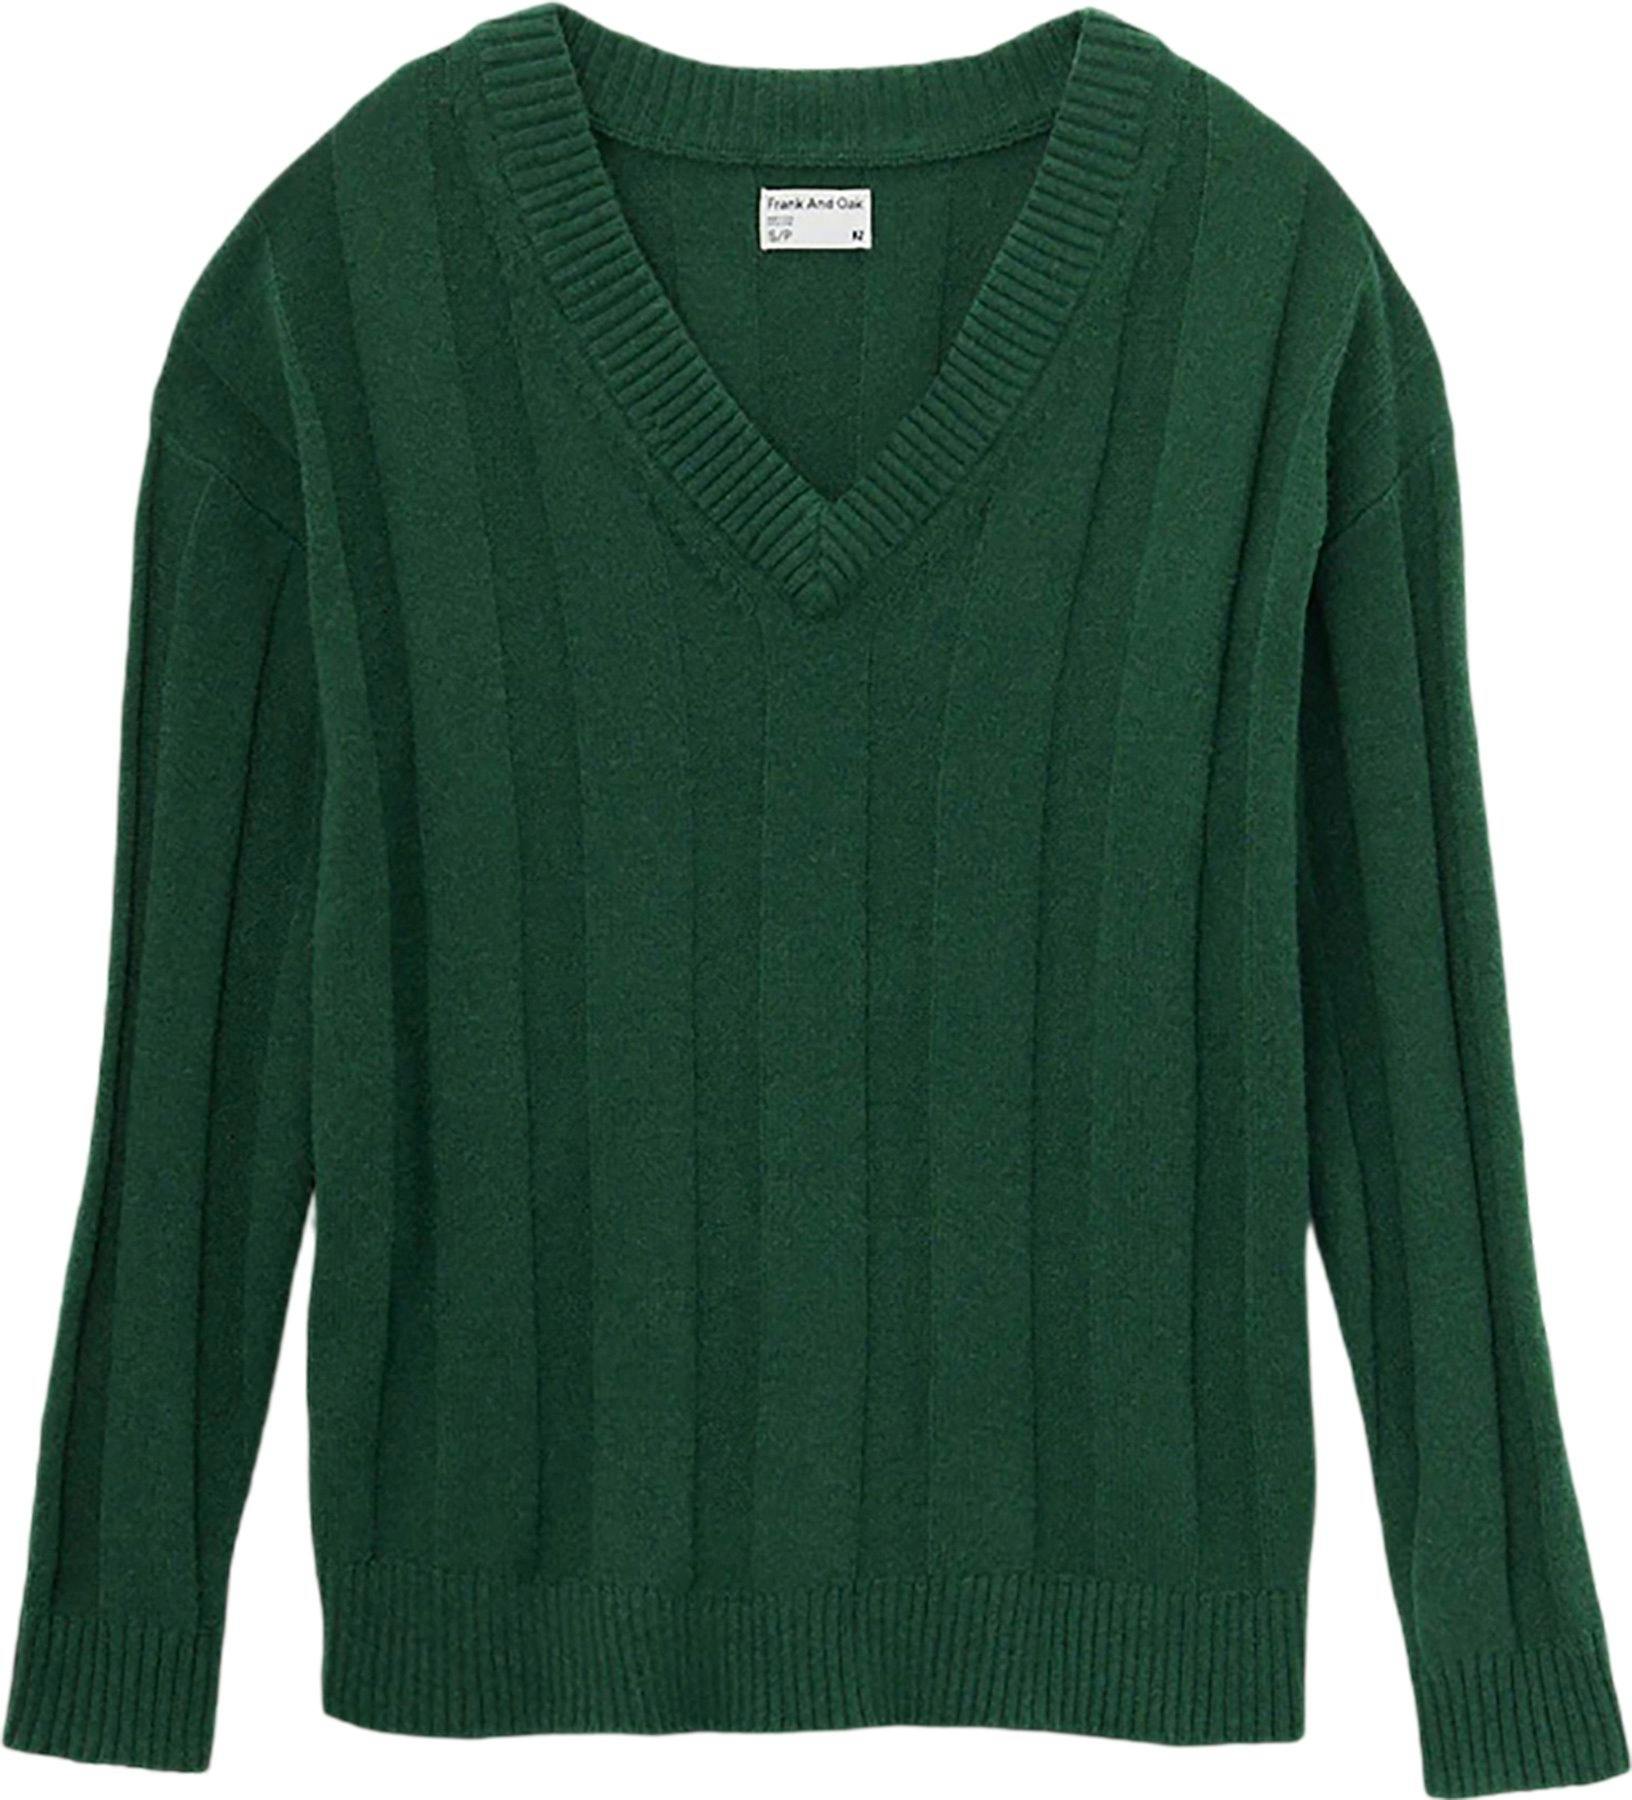 Product image for Merino Wool Blend Sweater - Women's